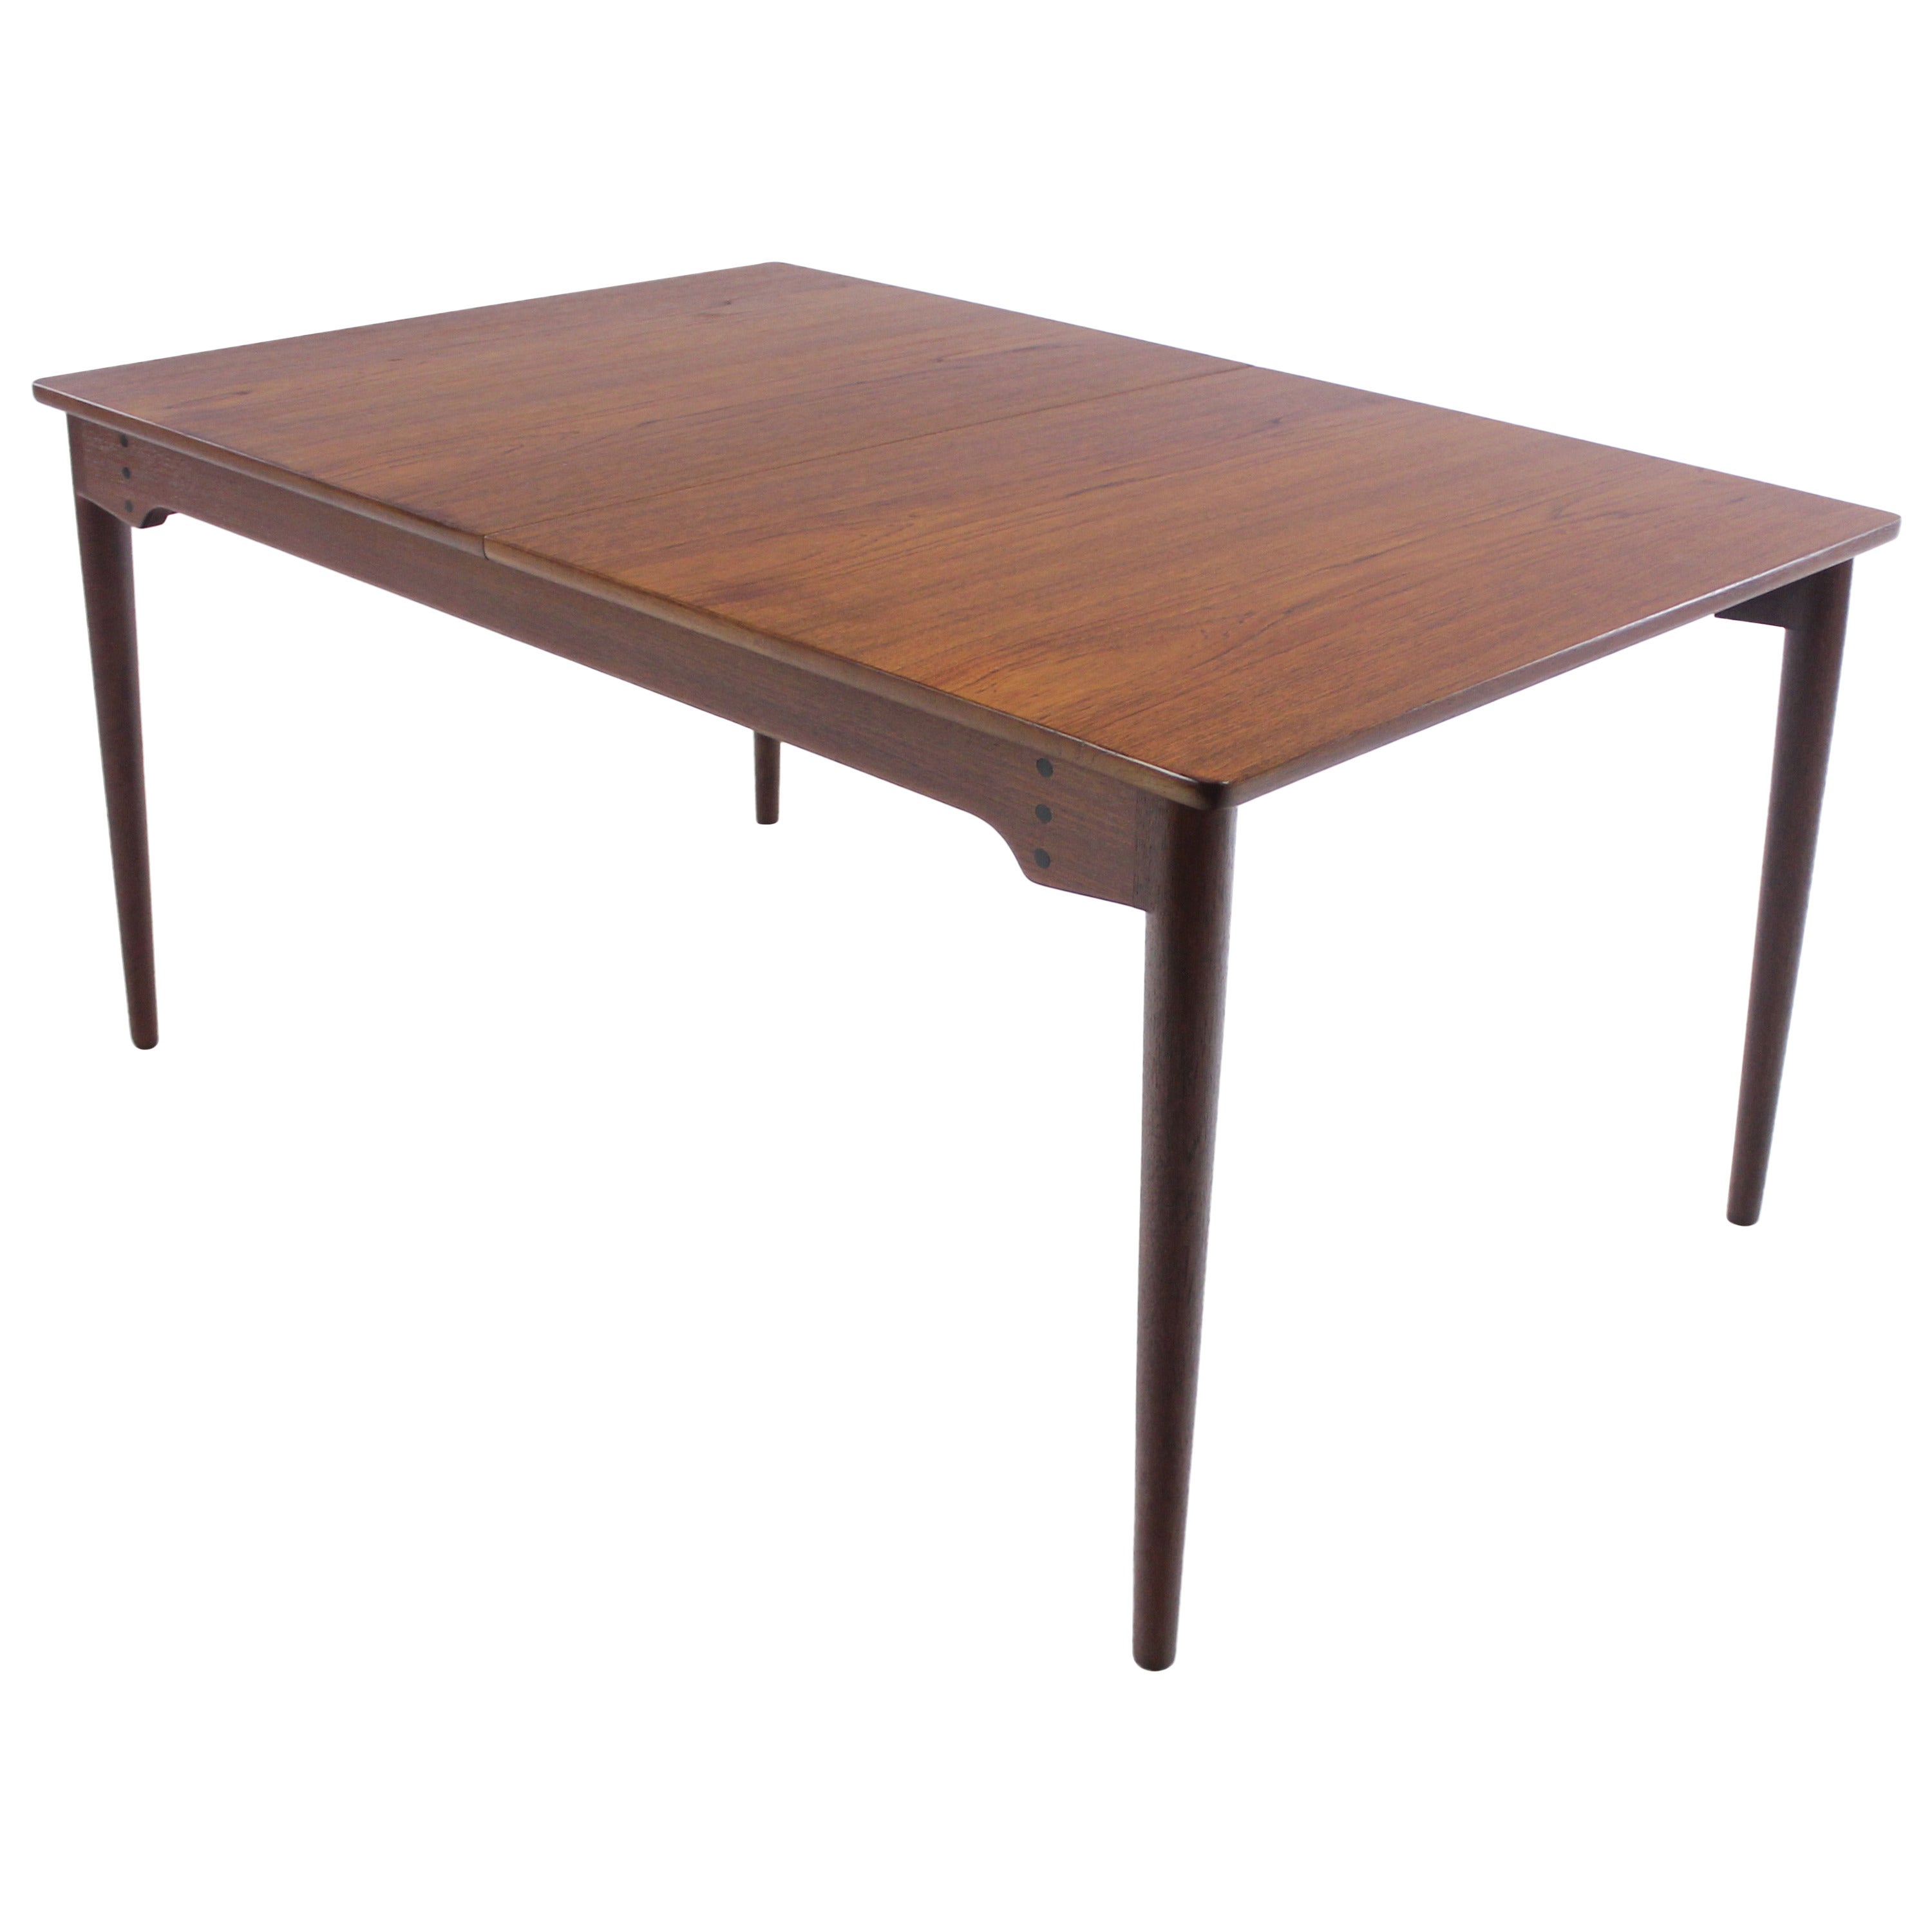 Rare Danish Modern Dining Table with Two Leaves Designed by Finn Juhl For Sale